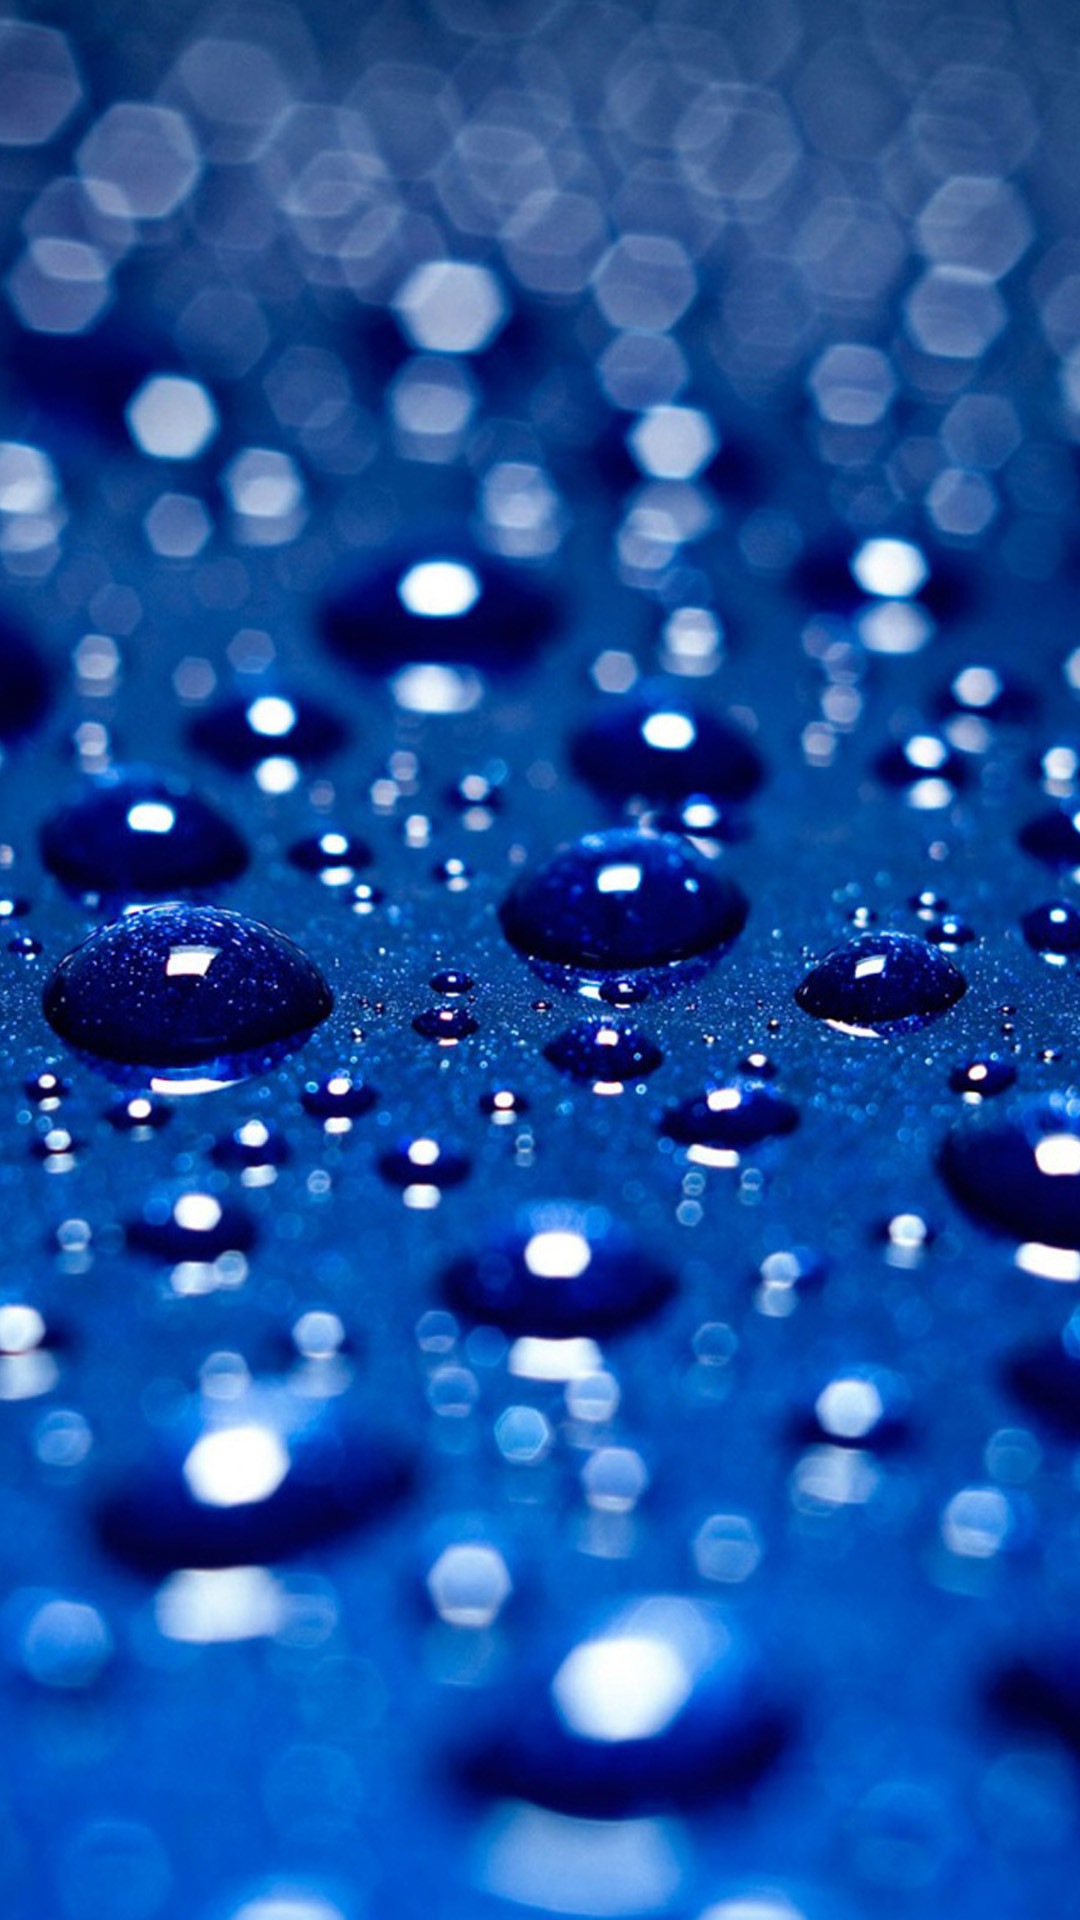 1080x1920 Blue water drops 04 Samsung Galaxy Note 3 Wallpapers